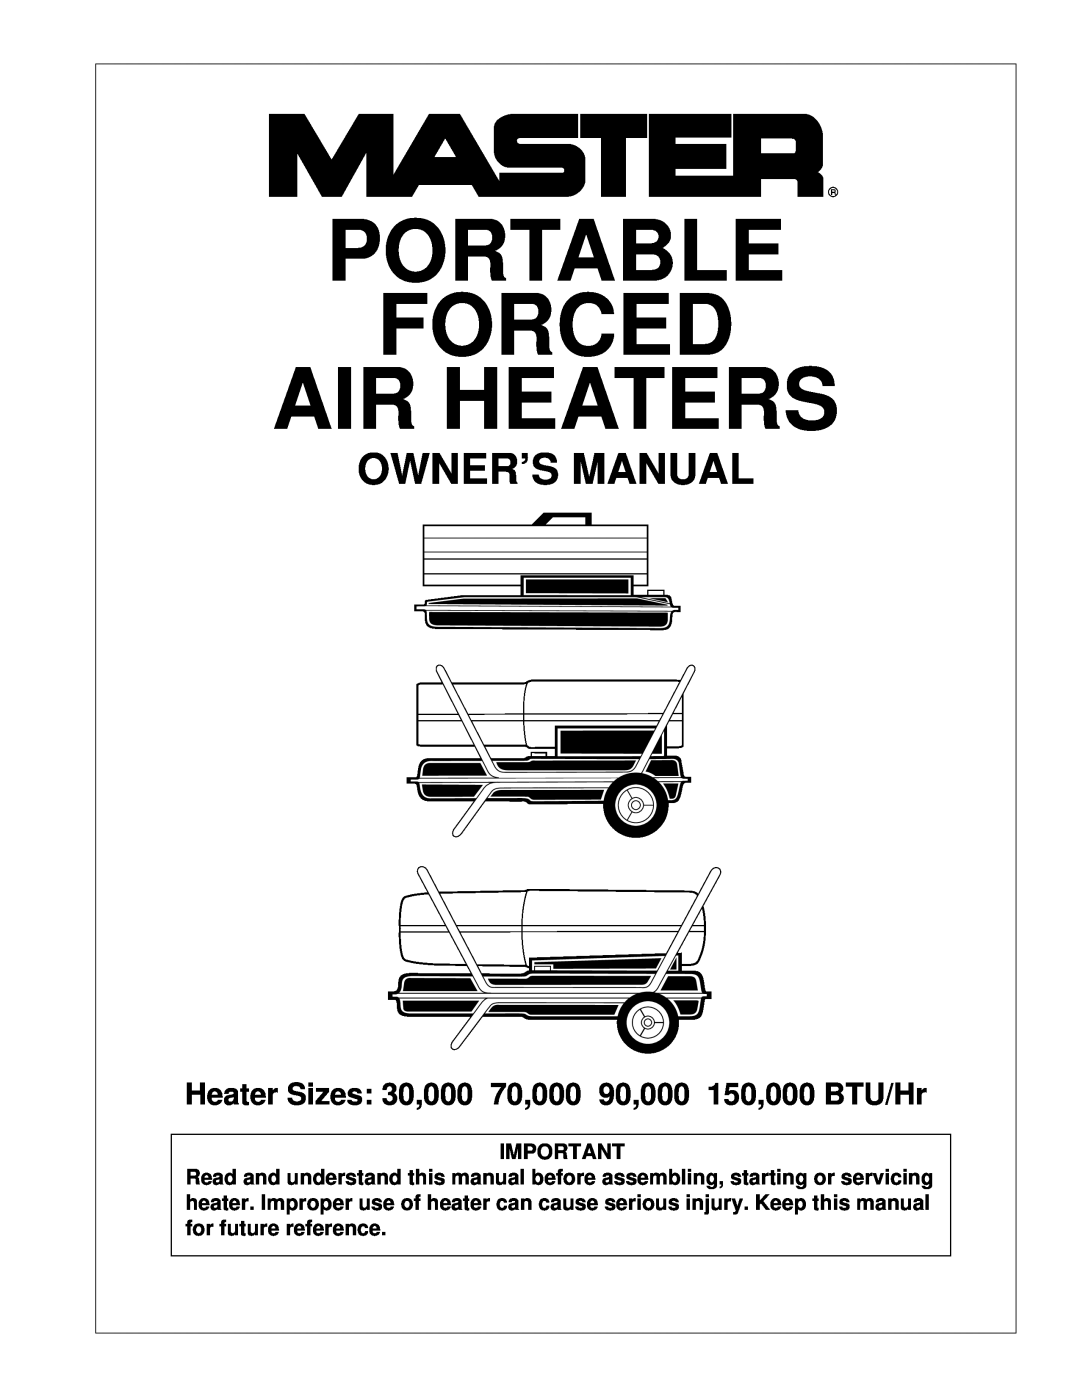 Desa H.S.I. Series owner manual Heater Sizes 30,000 70,000 90,000 150,000 BTU/Hr, Portable Forced Air Heaters 